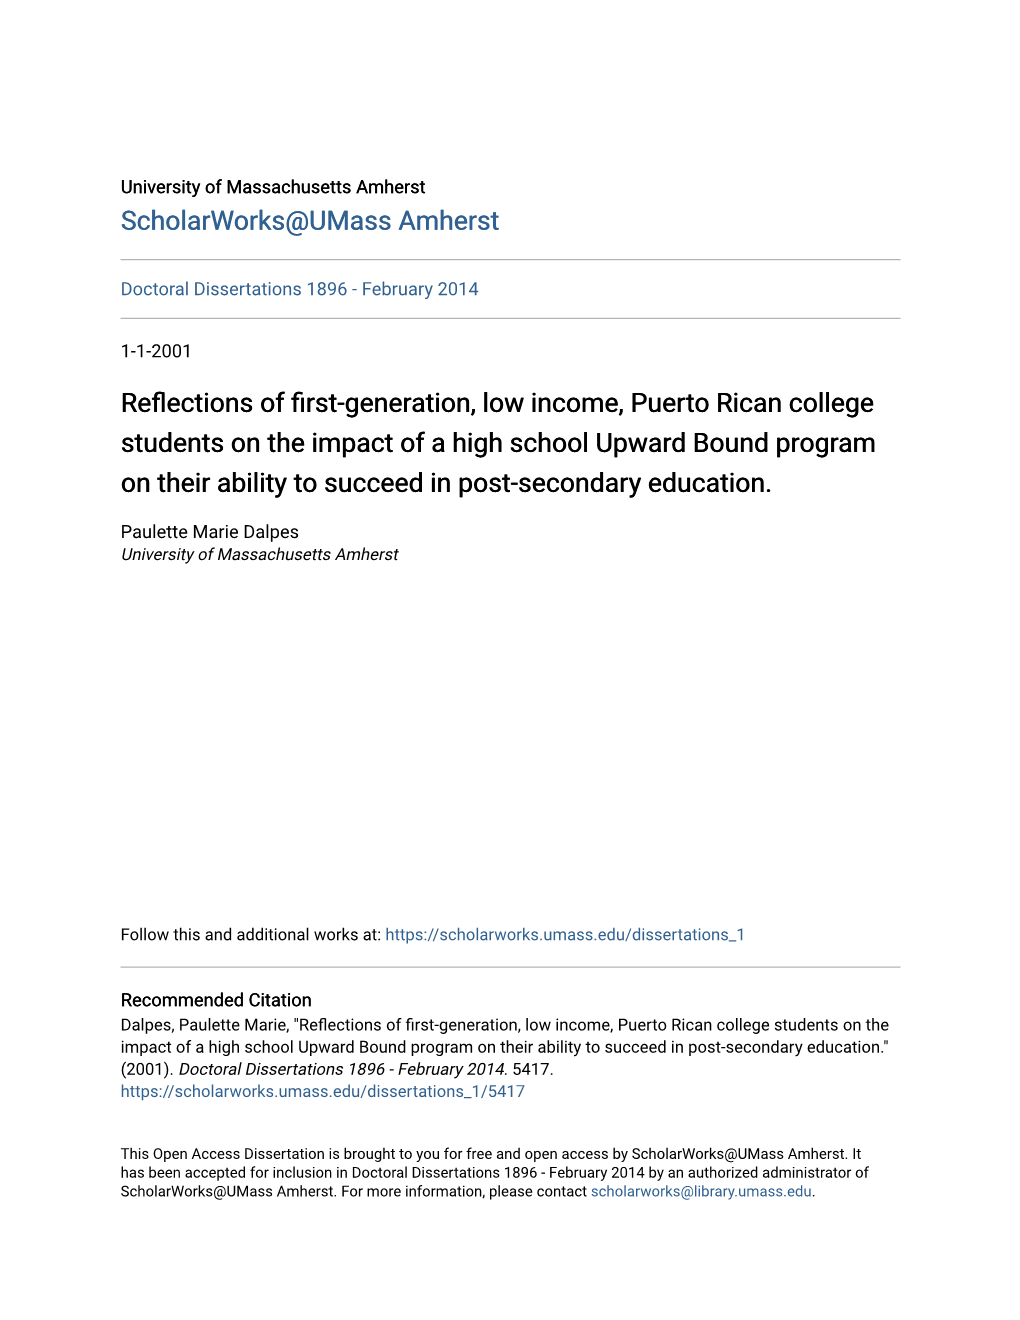 Reflections of First-Generation, Low Income, Puerto Rican College Students on the Impact of a High School Upward Bound Program O